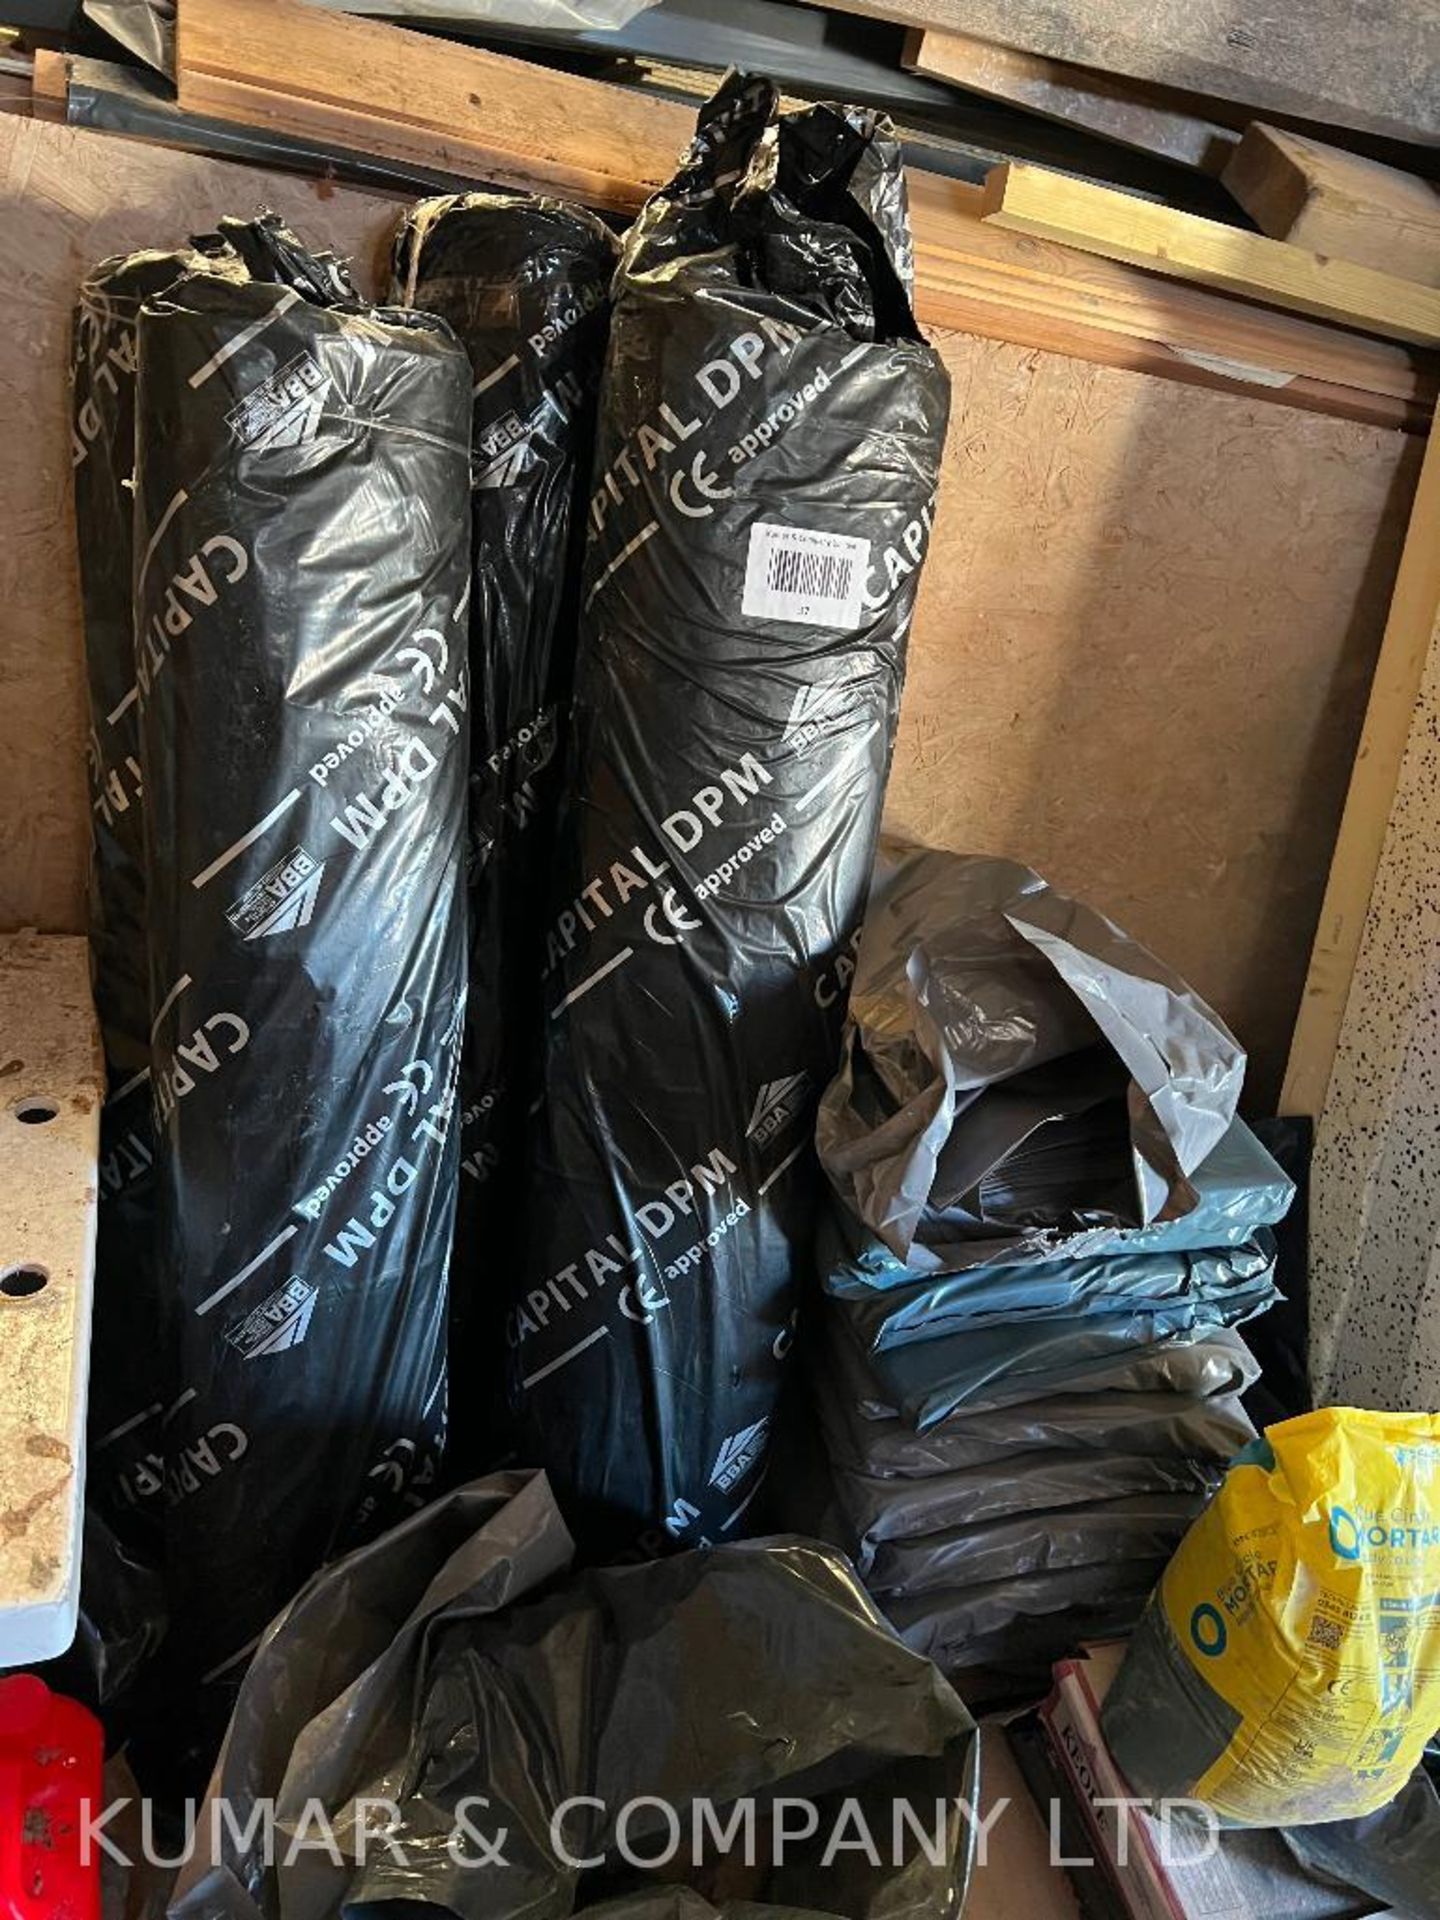 Approximately 10 Bags of New Rubble Sacks and 4 Rolls of Capital DPM Damp Proof Membrane in Black PL - Image 7 of 7